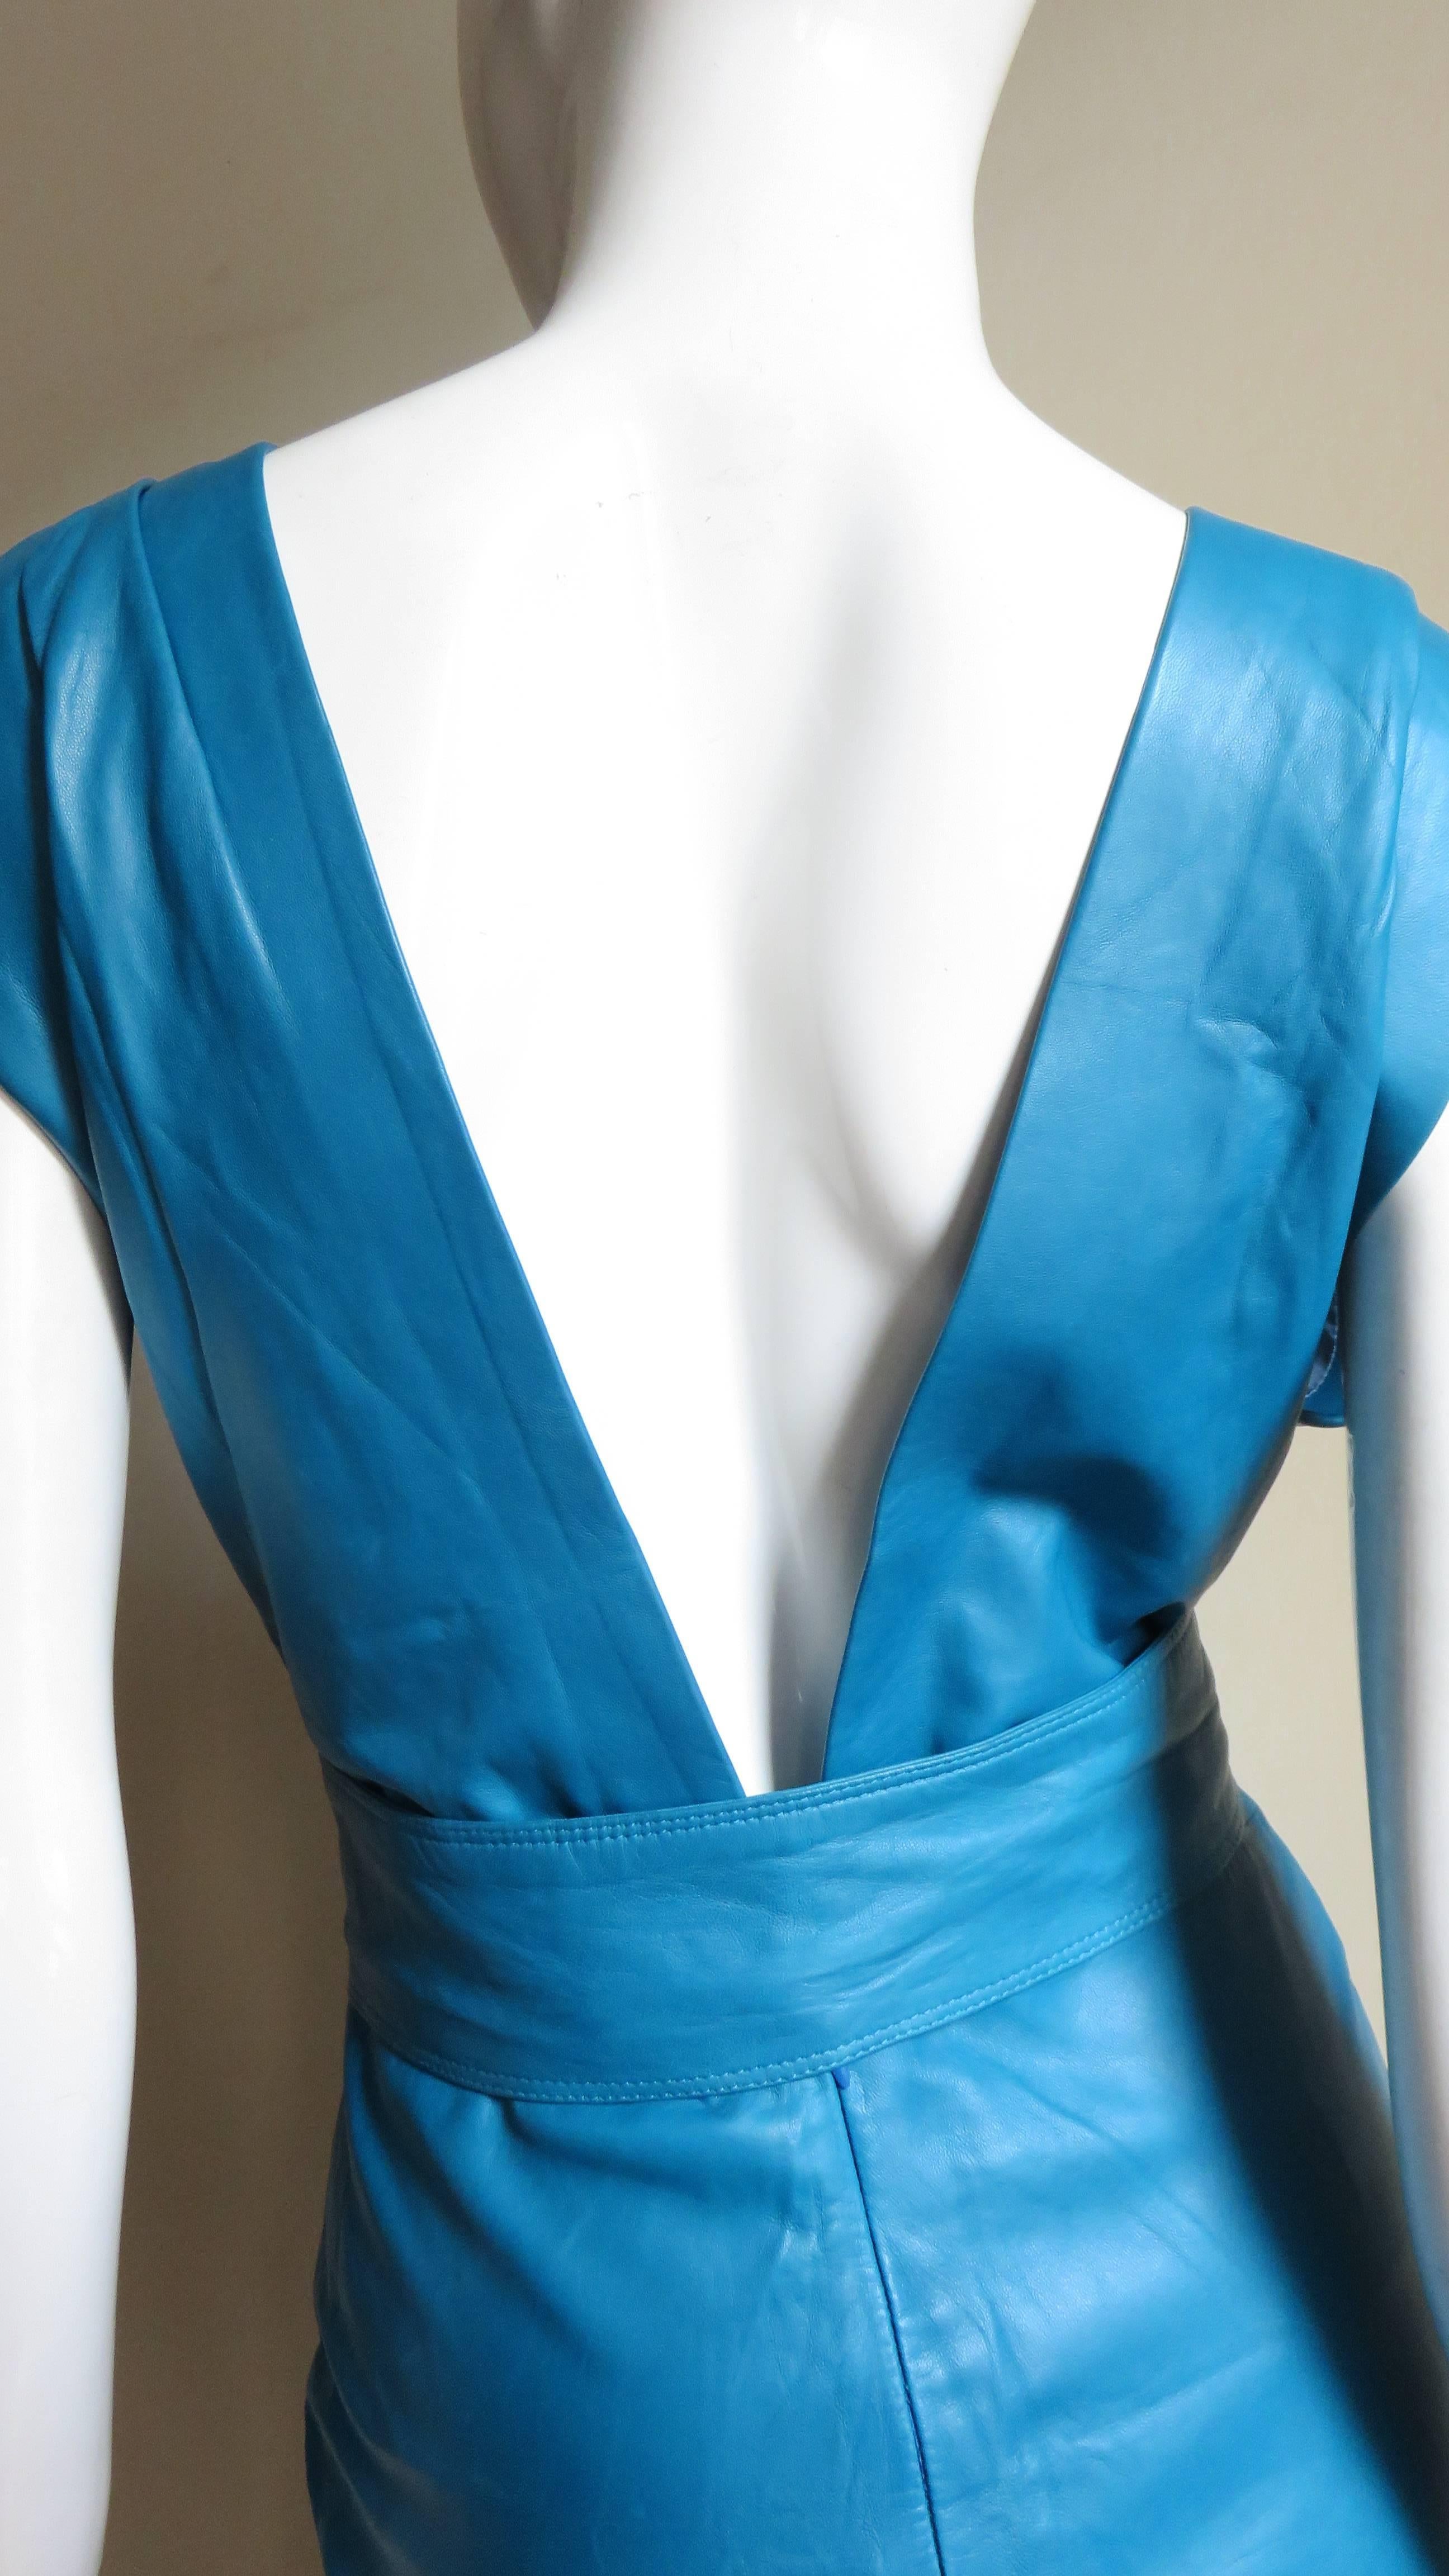  Gianni Versace New Turquoise Leather Dress 1990s For Sale 5